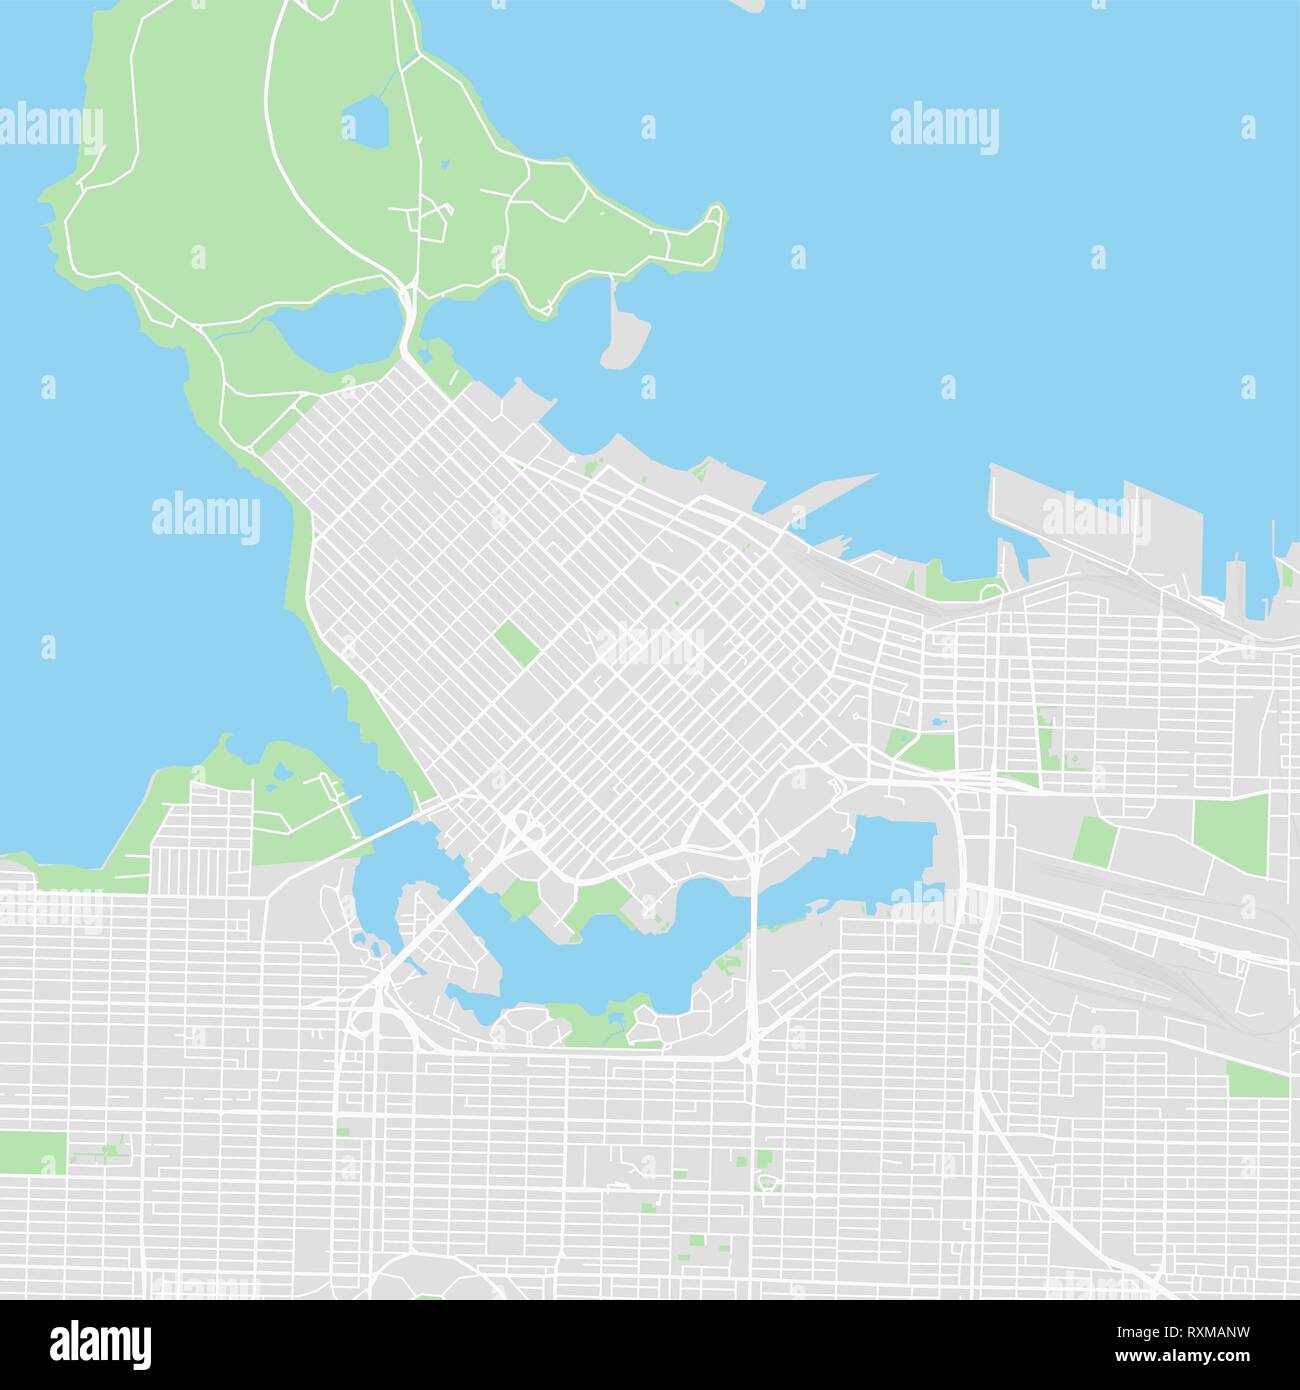 Downtown vector map of Vancouver, Canada. This printable map of Vancouver contains lines and classic colored shapes for land mass, parks, water, major Stock Vector